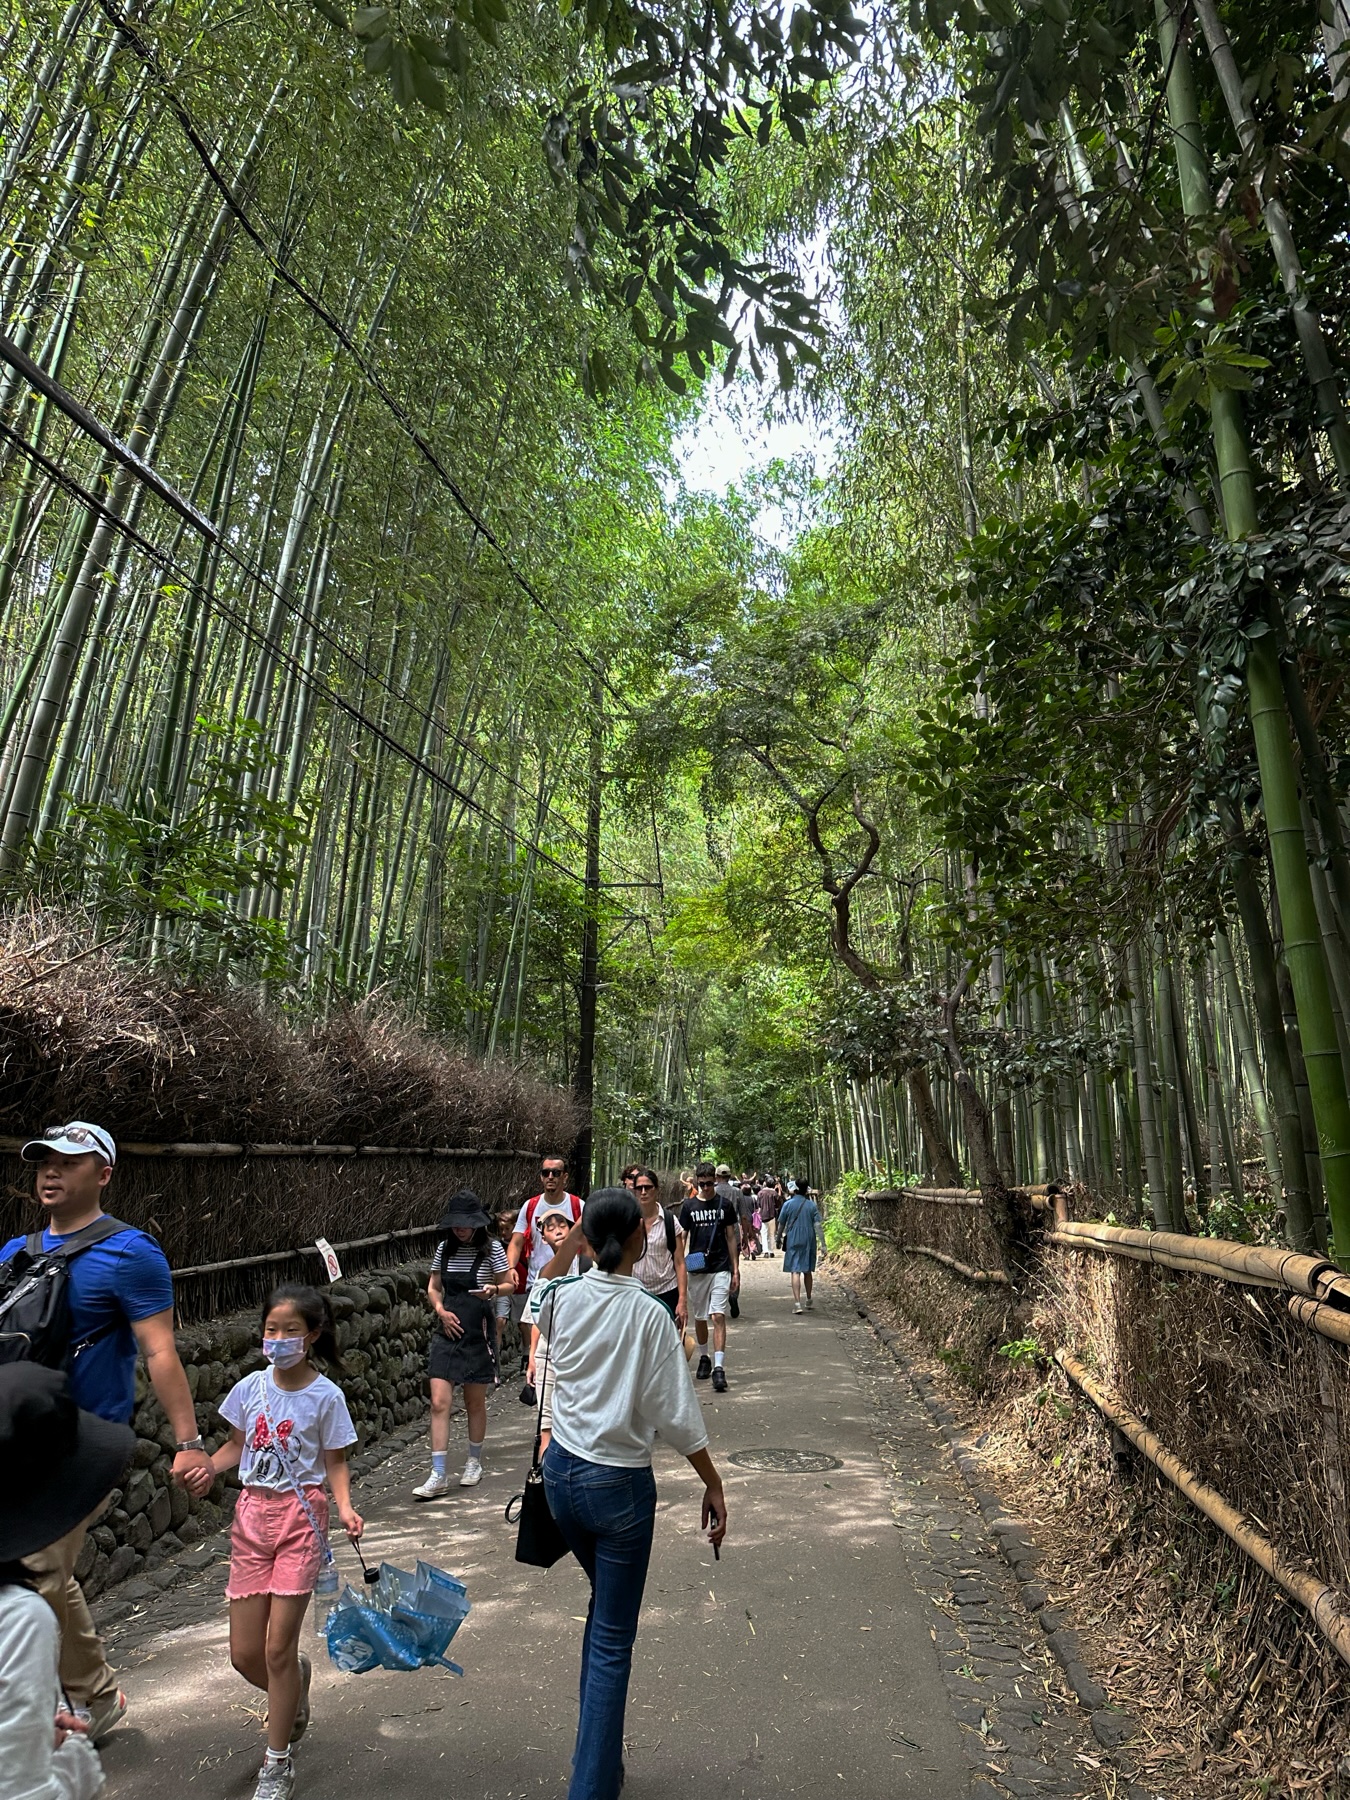 The bamboo Forest walkway